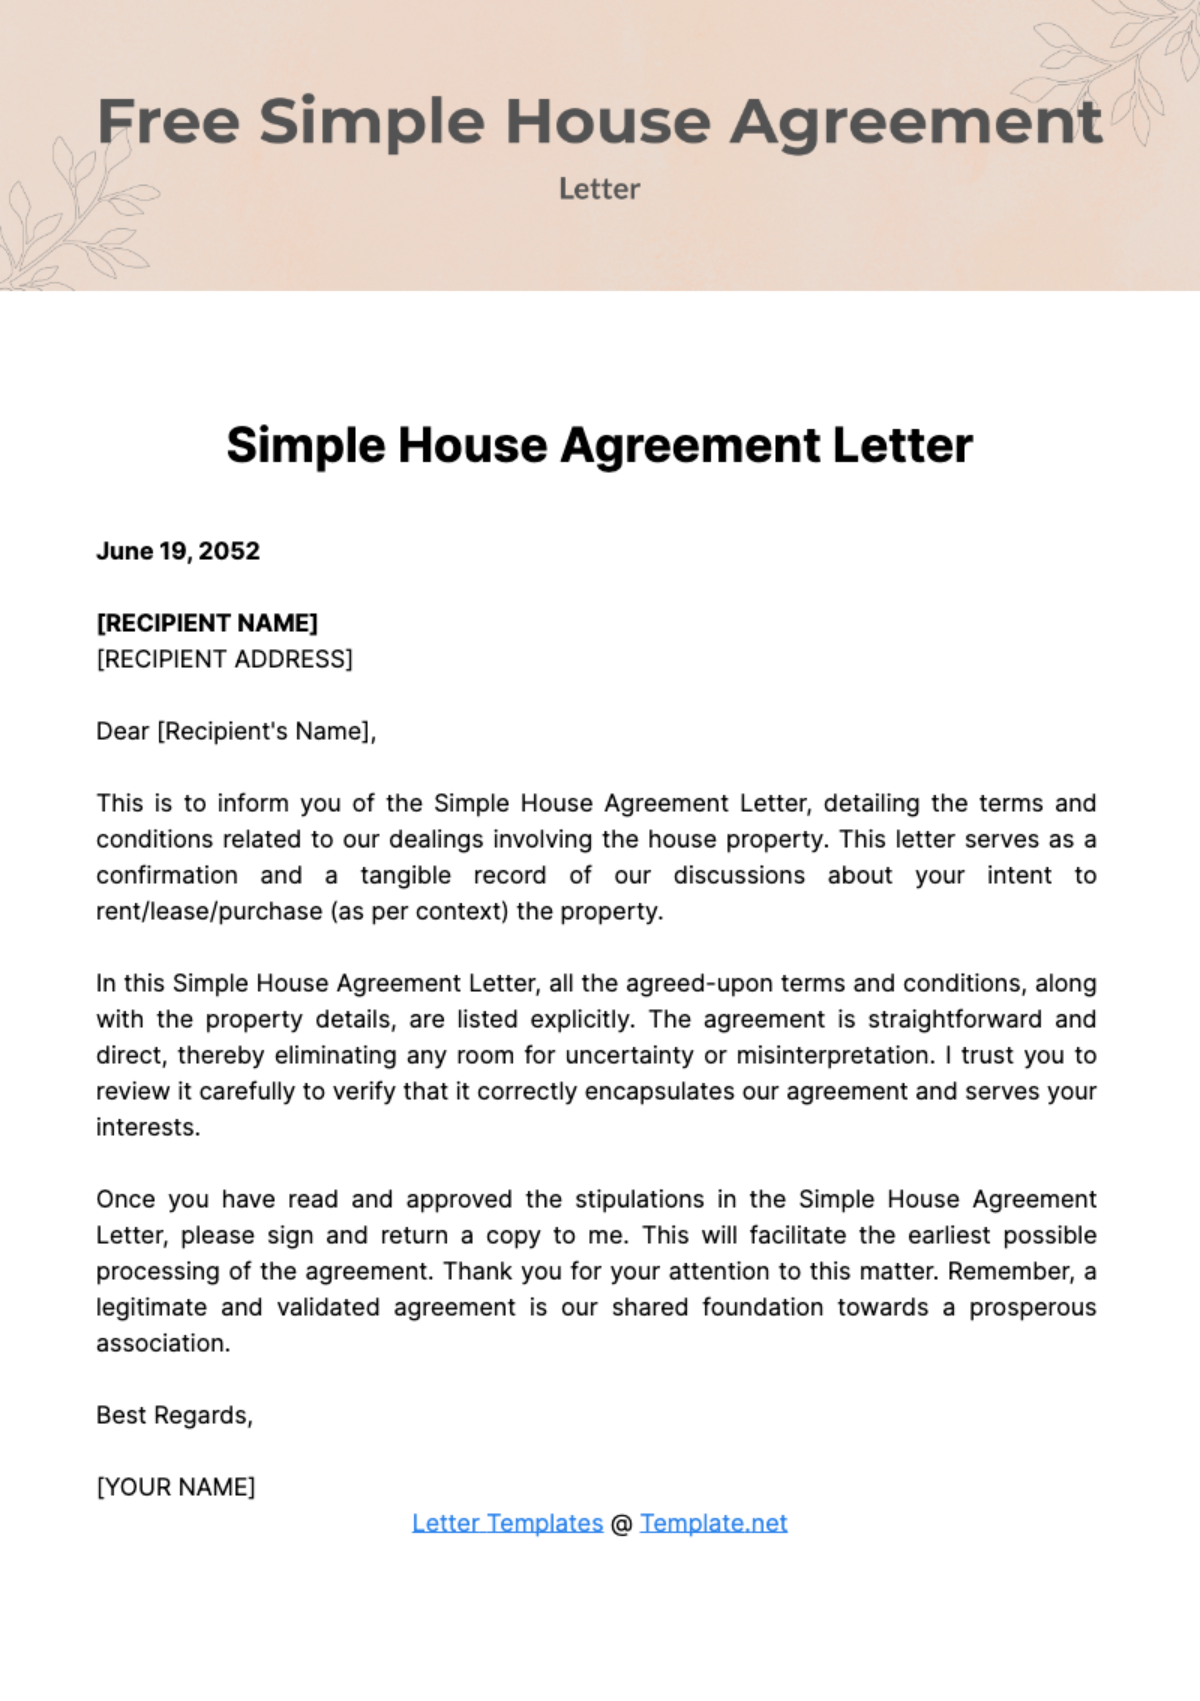 Free Simple House Agreement Letter Template